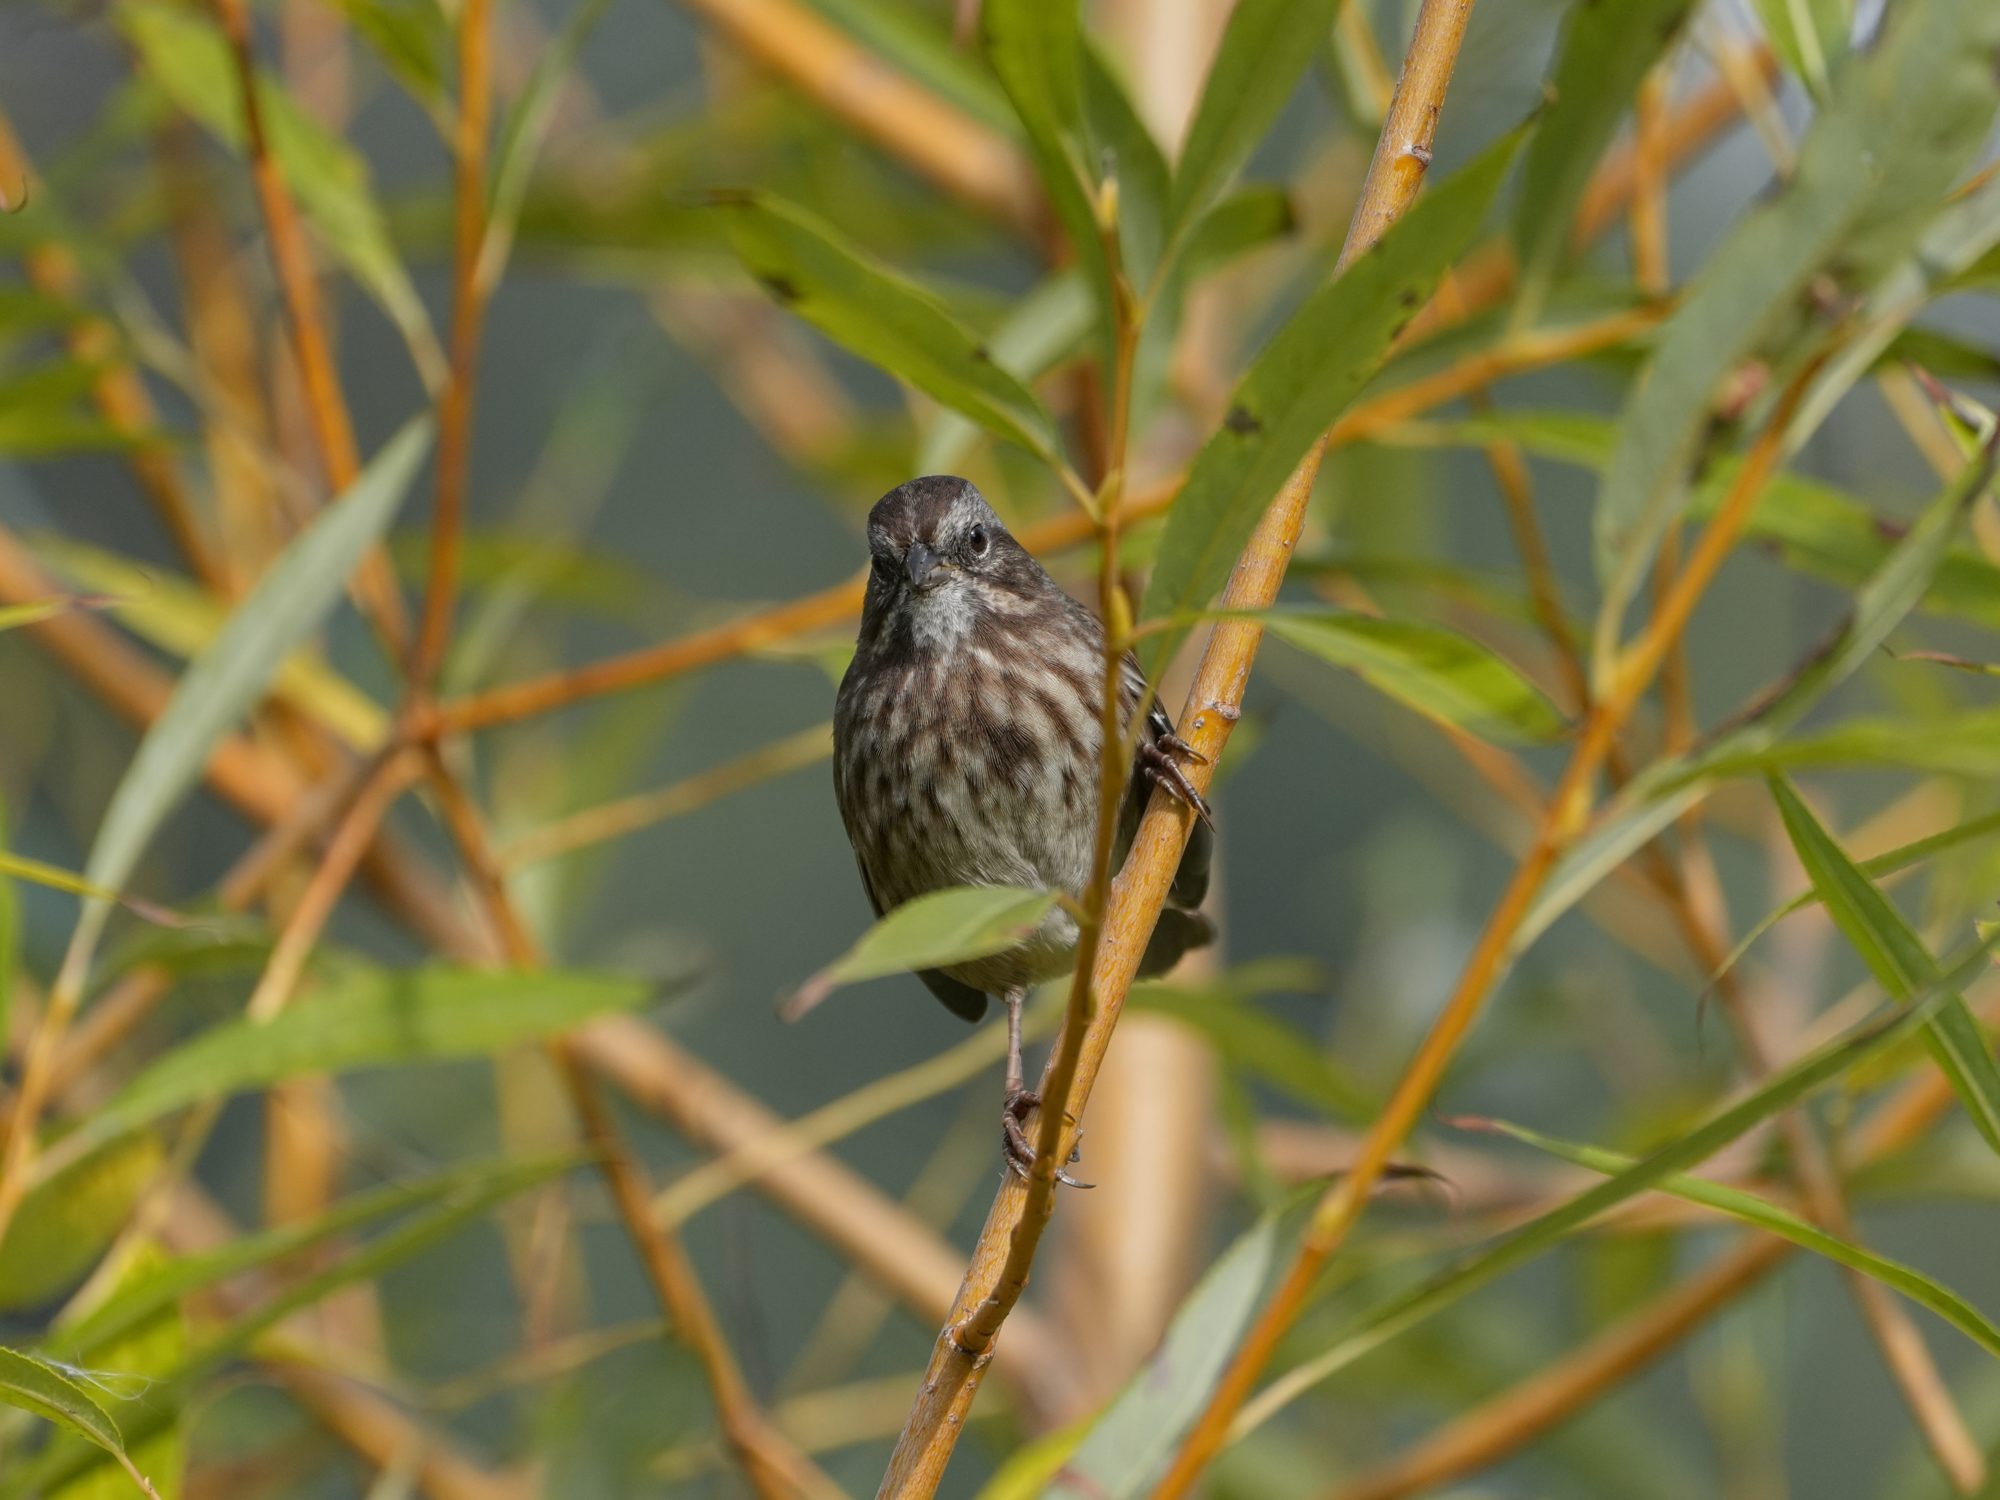 A Song Sparrow is sitting in a green bush